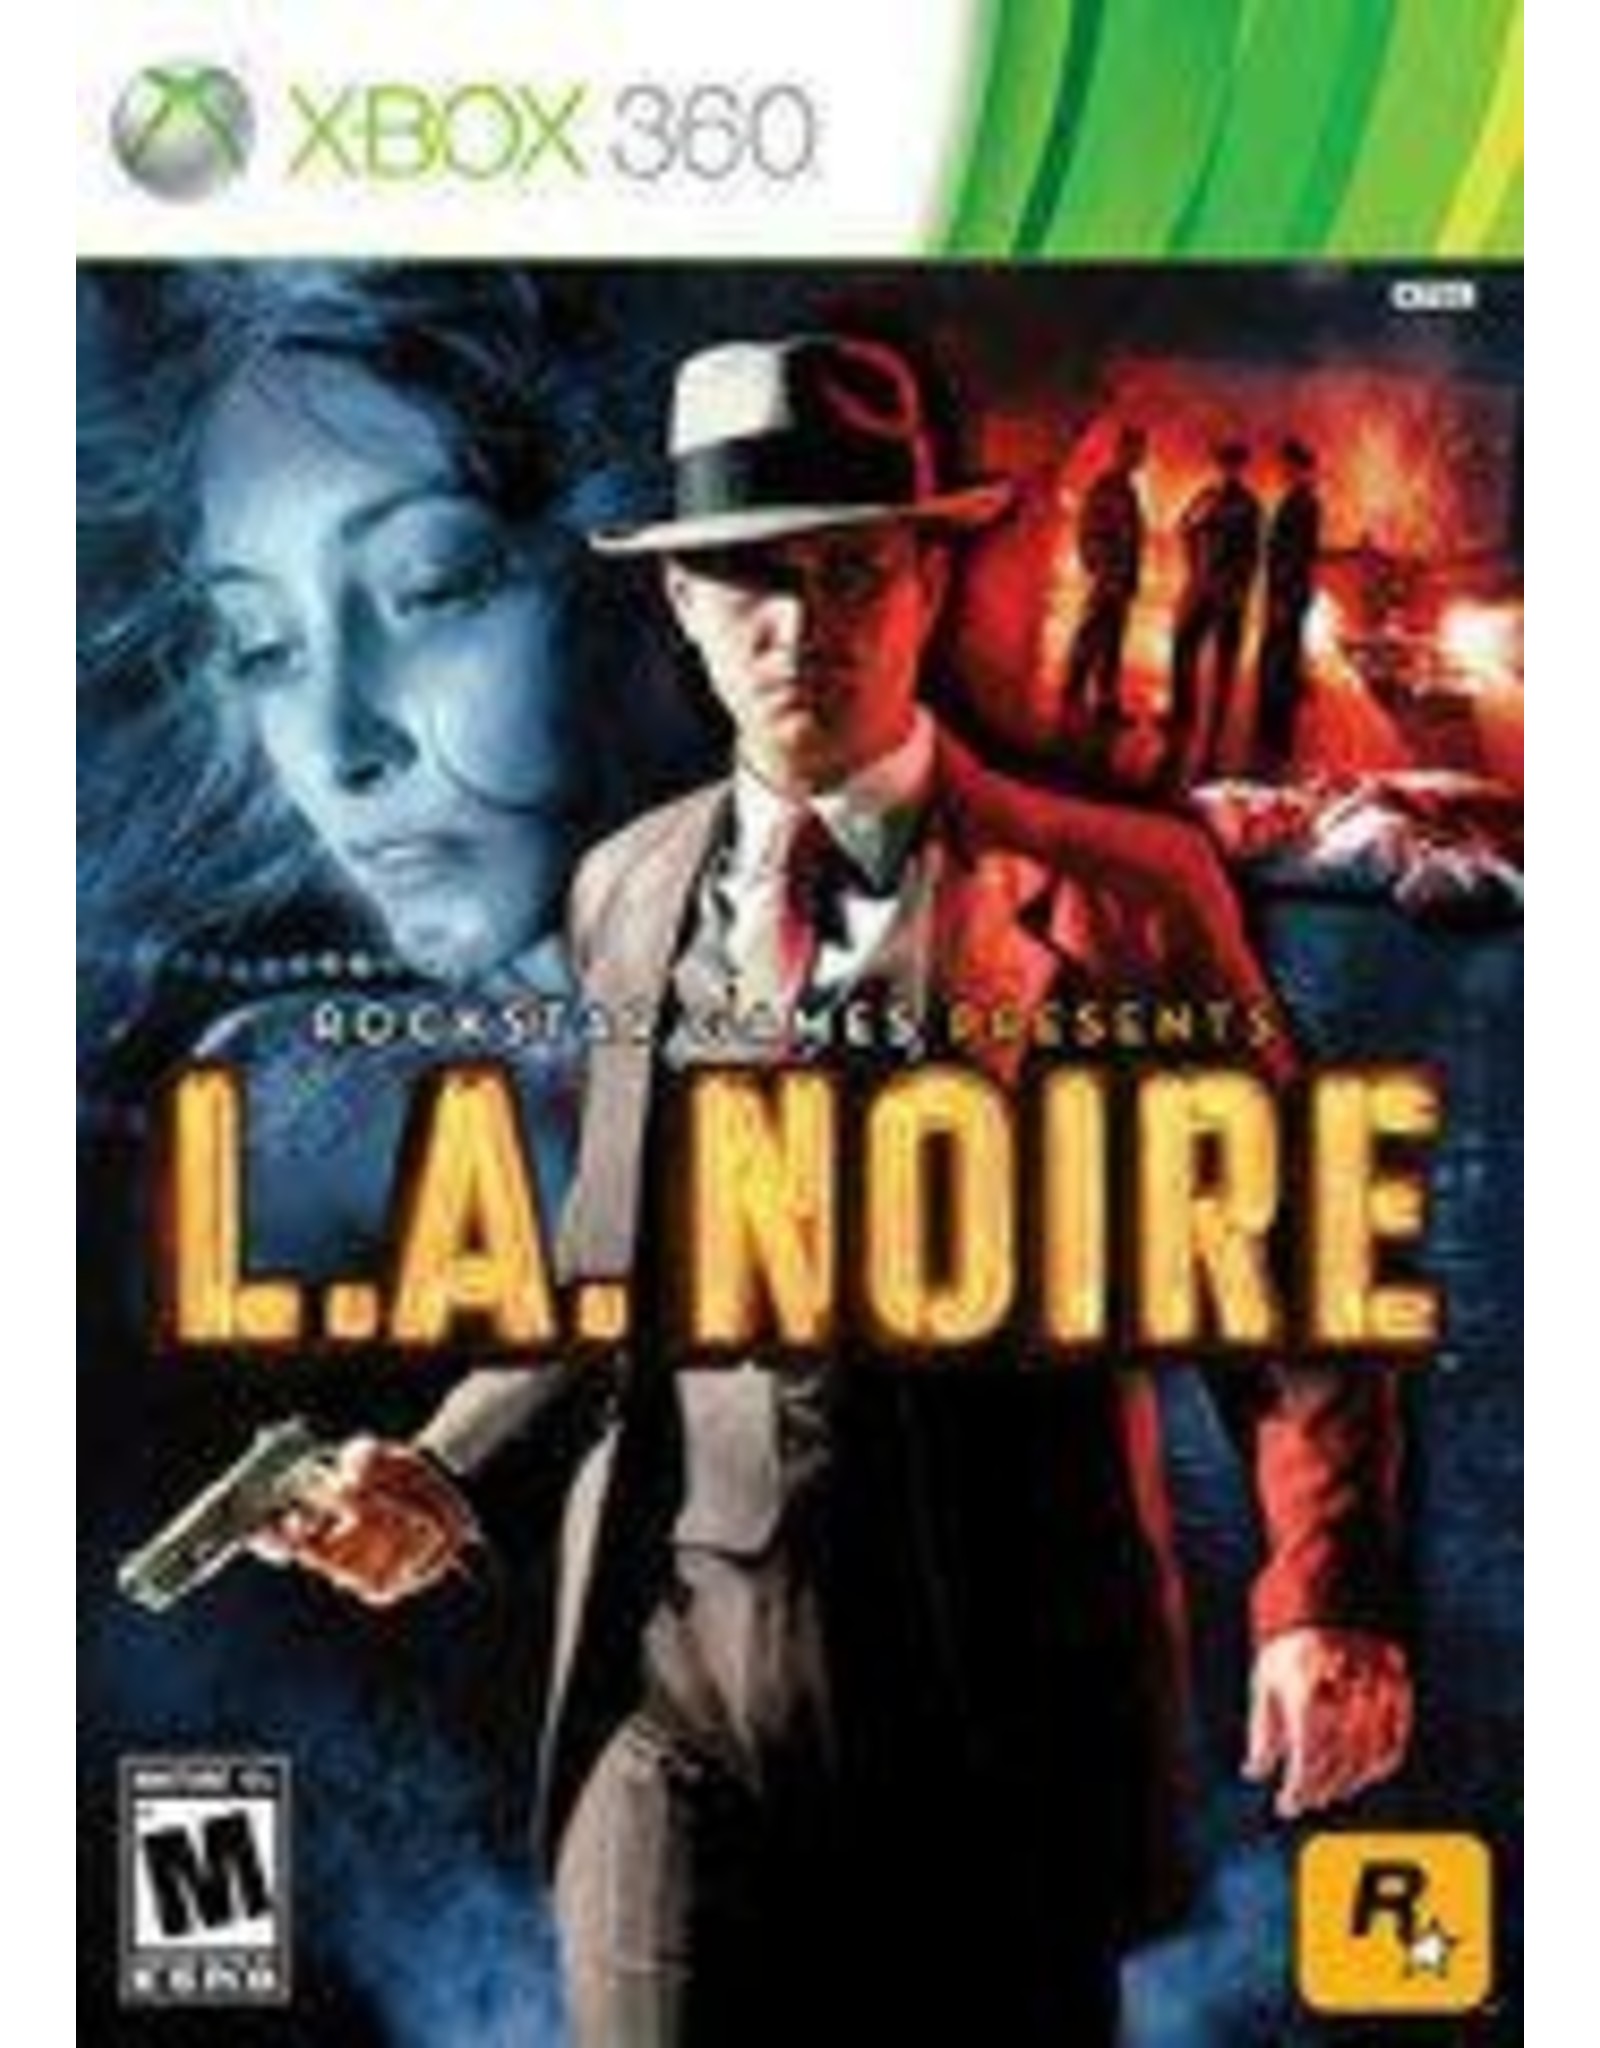 Xbox 360 L.A. Noire (Used)